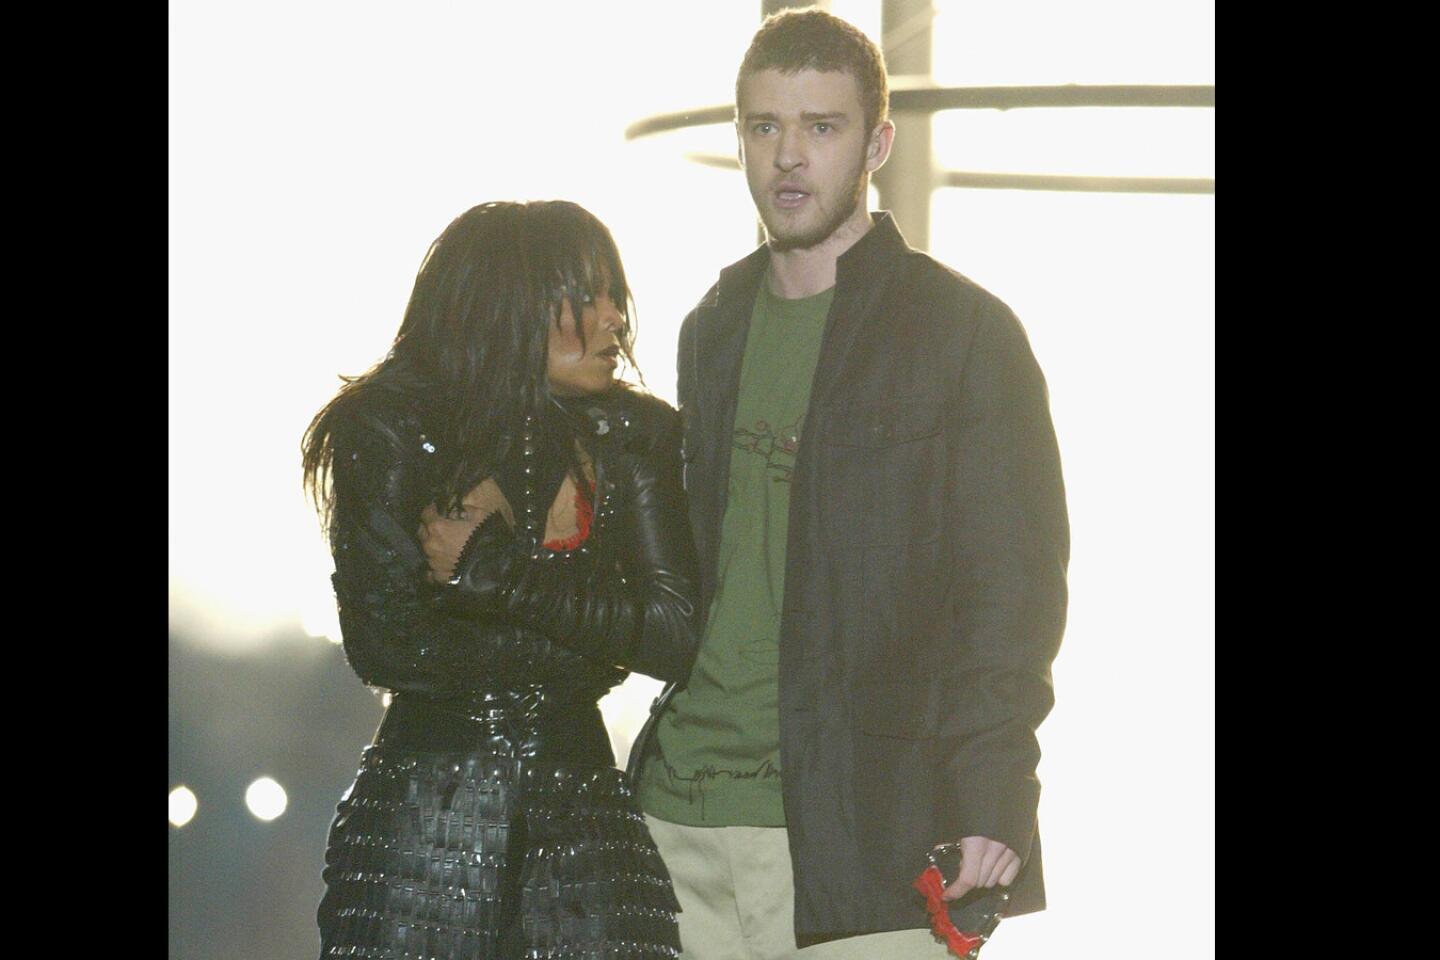 Two of the world's biggest pop stars brought some edge to the football party. But does anyone remember much else other than Timberlake ripping off part of Jackson's clothing? The phrases "wardrobe malfunction" and "nipplegate" were born, accompanied by a major FCC campaign and large fines.